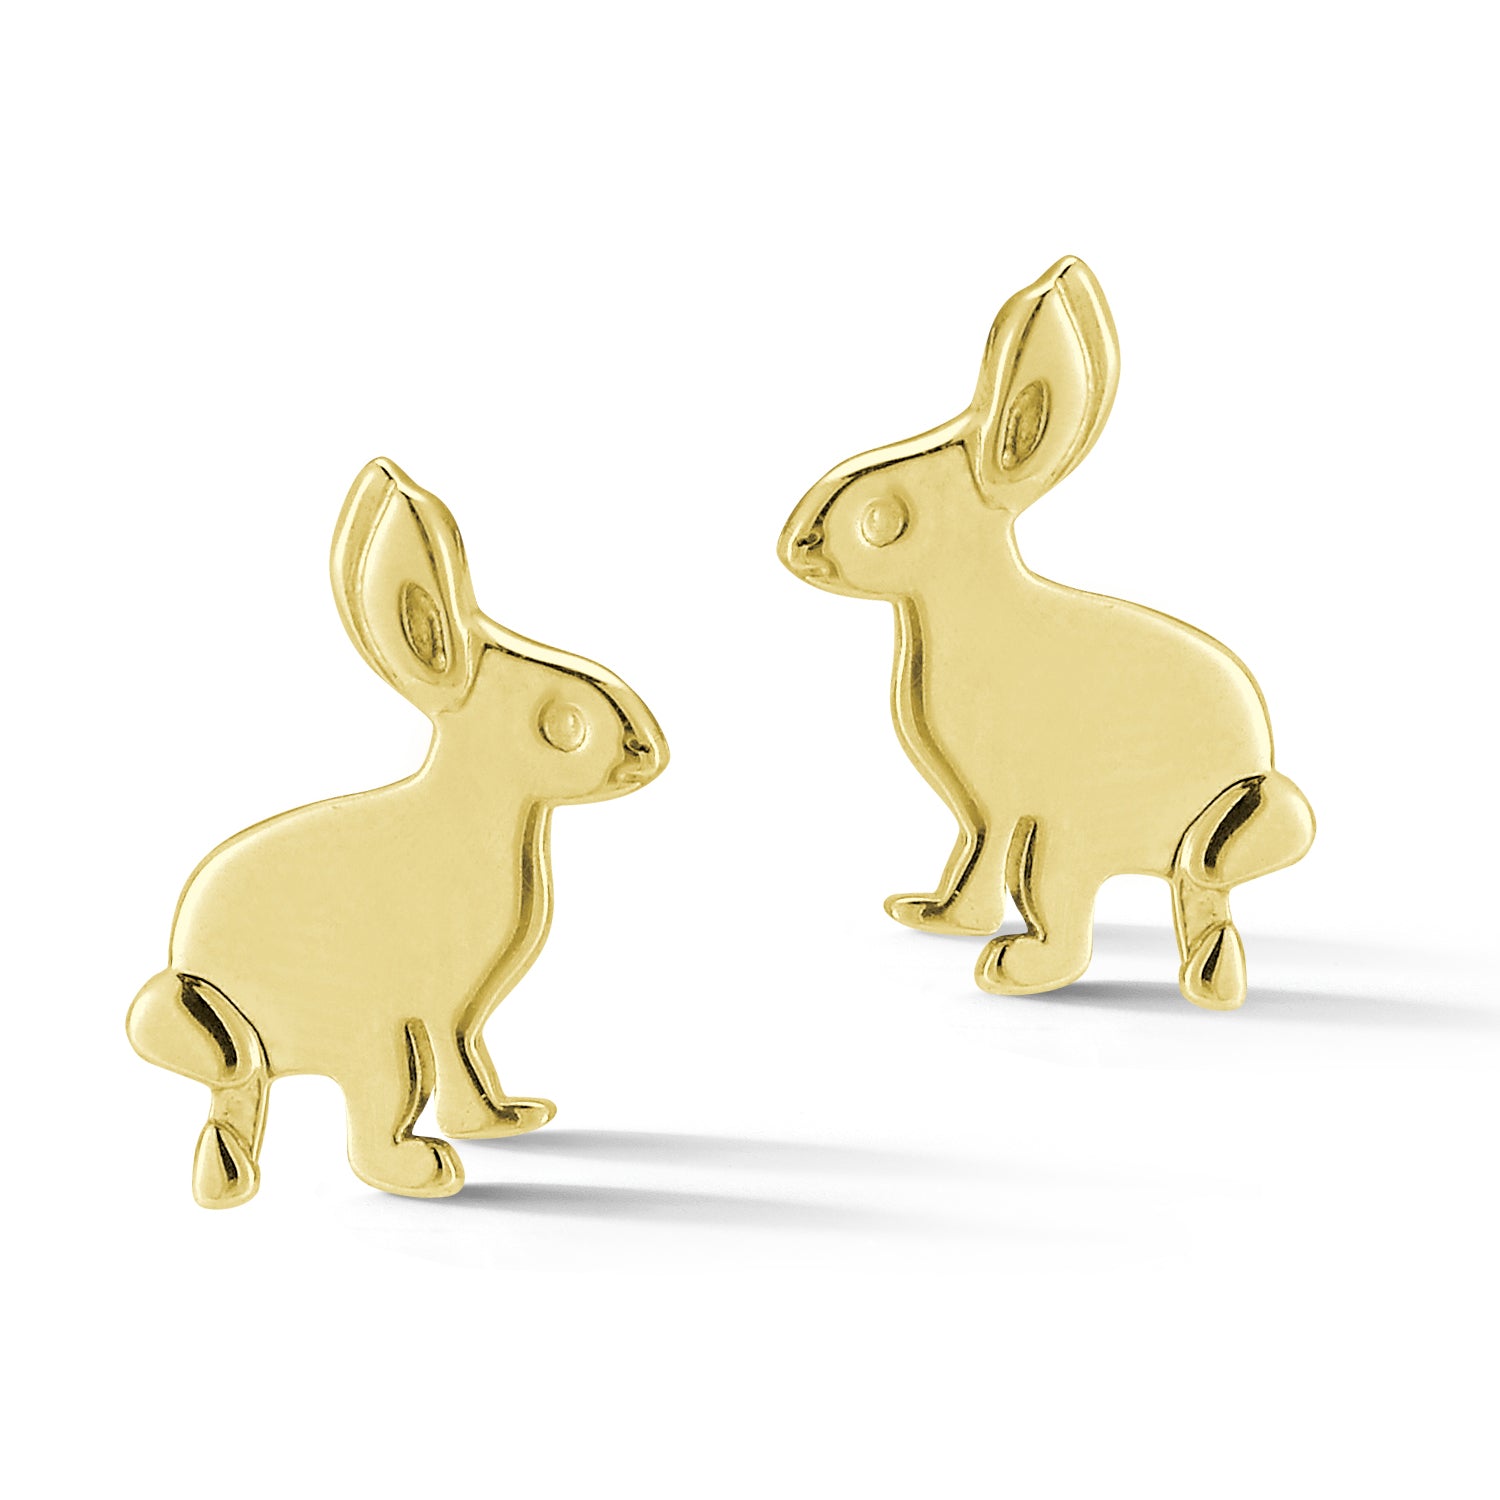 Trickster Bunny Left and Right stud earrings